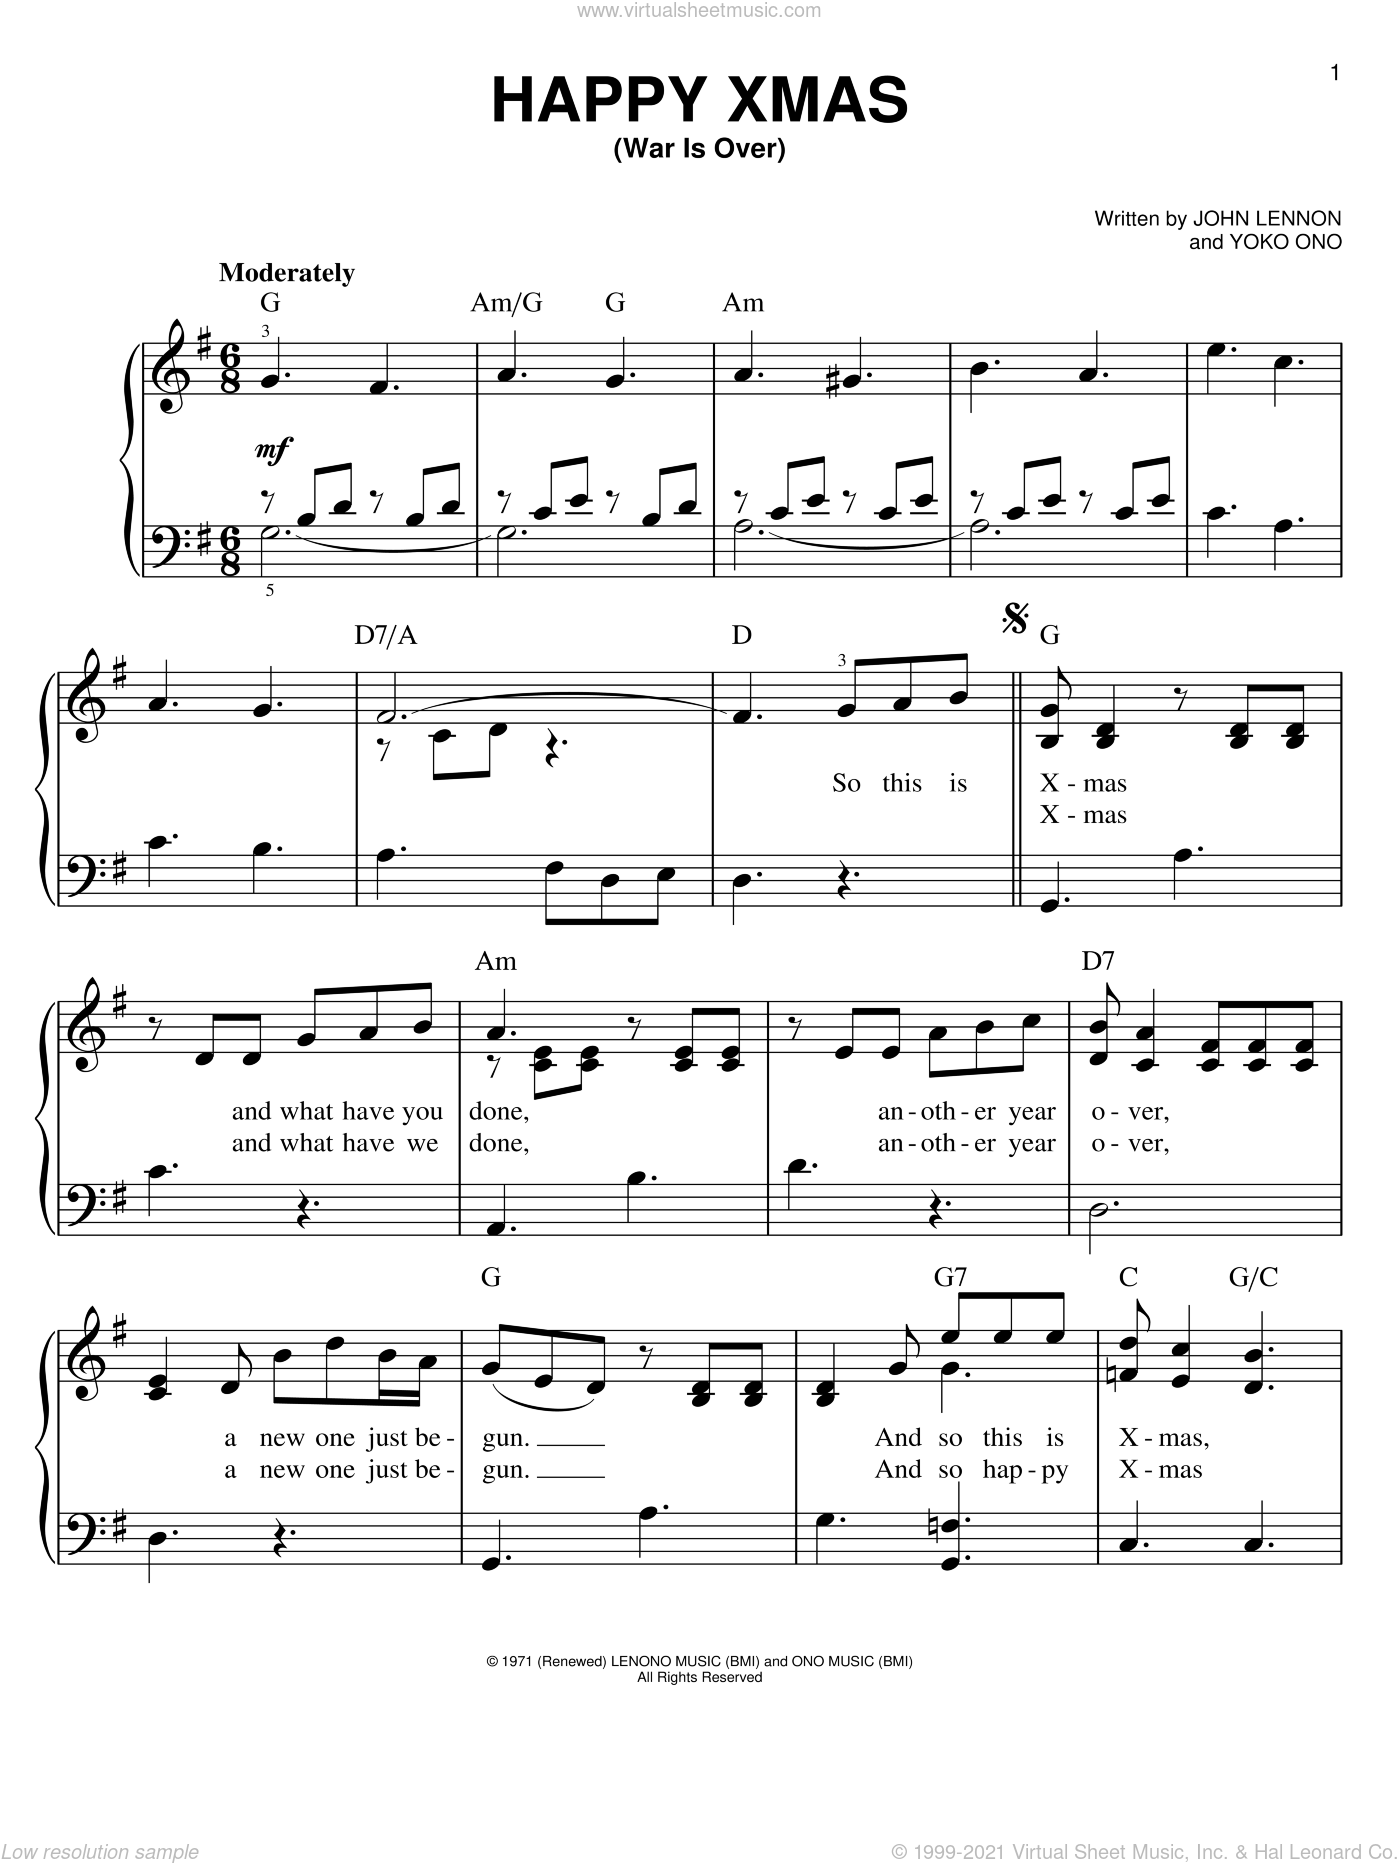 https://cdn3.virtualsheetmusic.com/images/first_pages/HL/HL-6540First_BIG_1.png